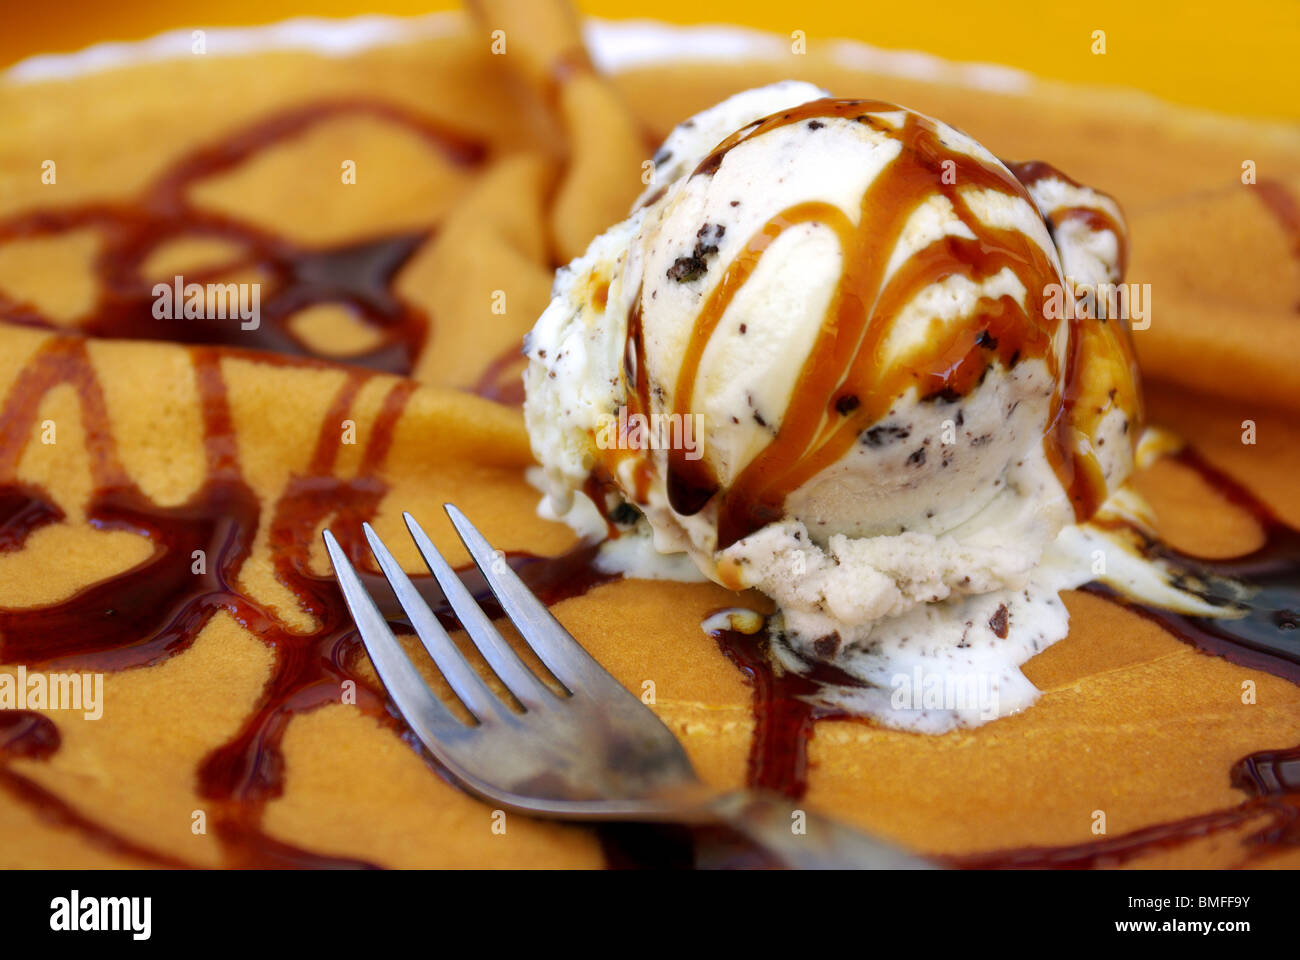 Delicious caramel ice cream over a crepe with chocolate topping Stock Photo